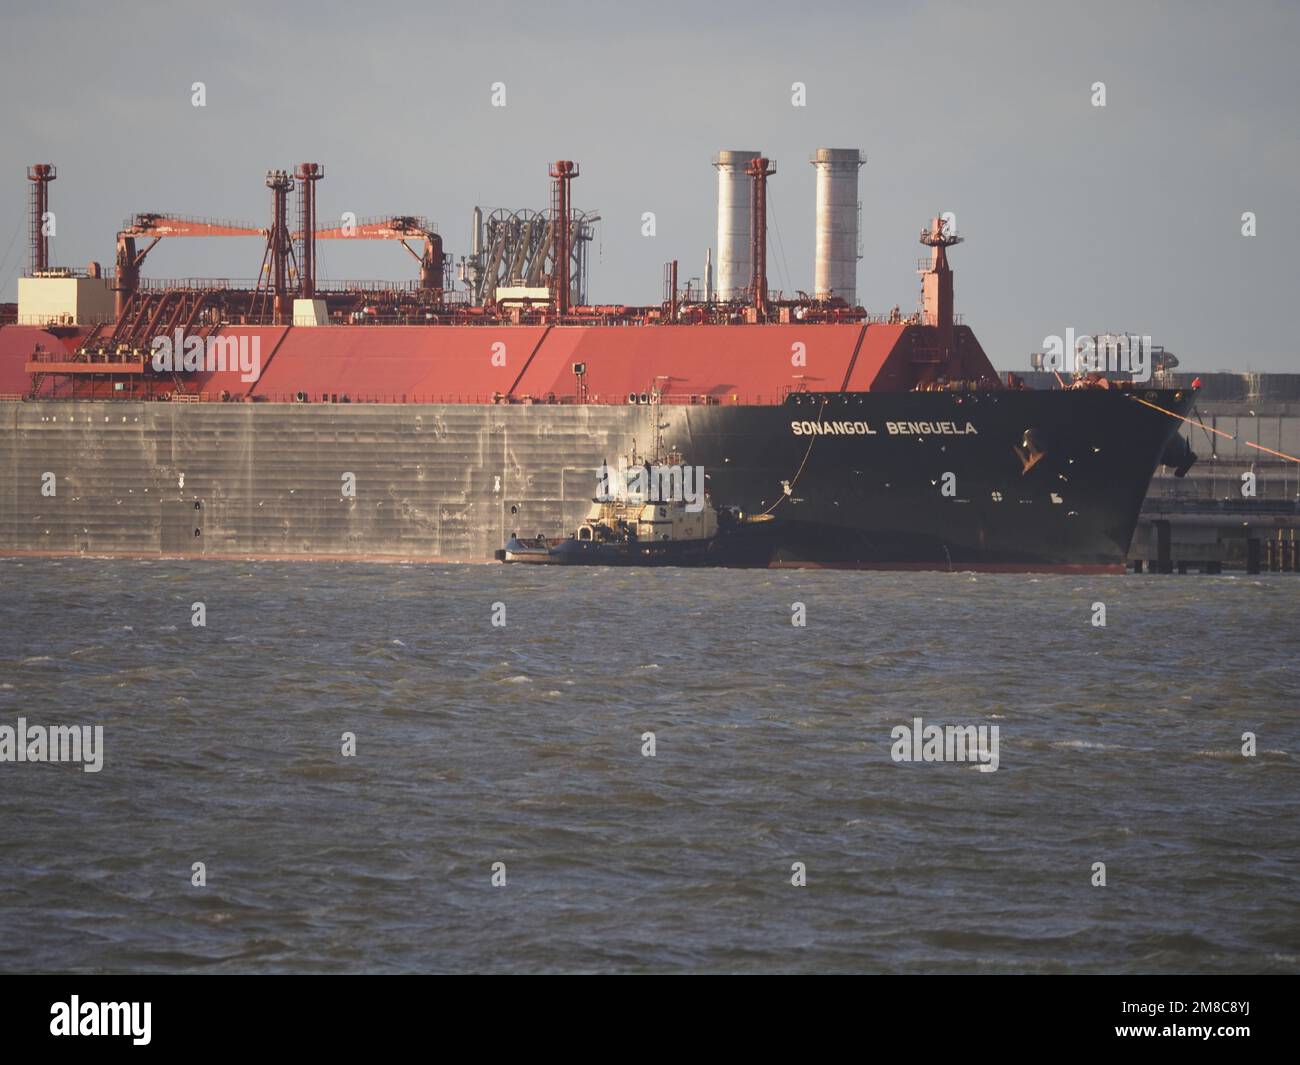 Sheerness, Kent, UK. 13th Jan, 2023. UK gas prices forecast to drop: two LNG gas ships seen berthed at National Grid's Grain LNG facility (Europe's largest storage facility) this afternoon pictured from Sheerness, Kent. Red hulled vessel is Rias Baixas Knutsen, blue hulled vessel arrived this afternoon is Sonangol Benguela. Credit: James Bell/Alamy Live News Stock Photo